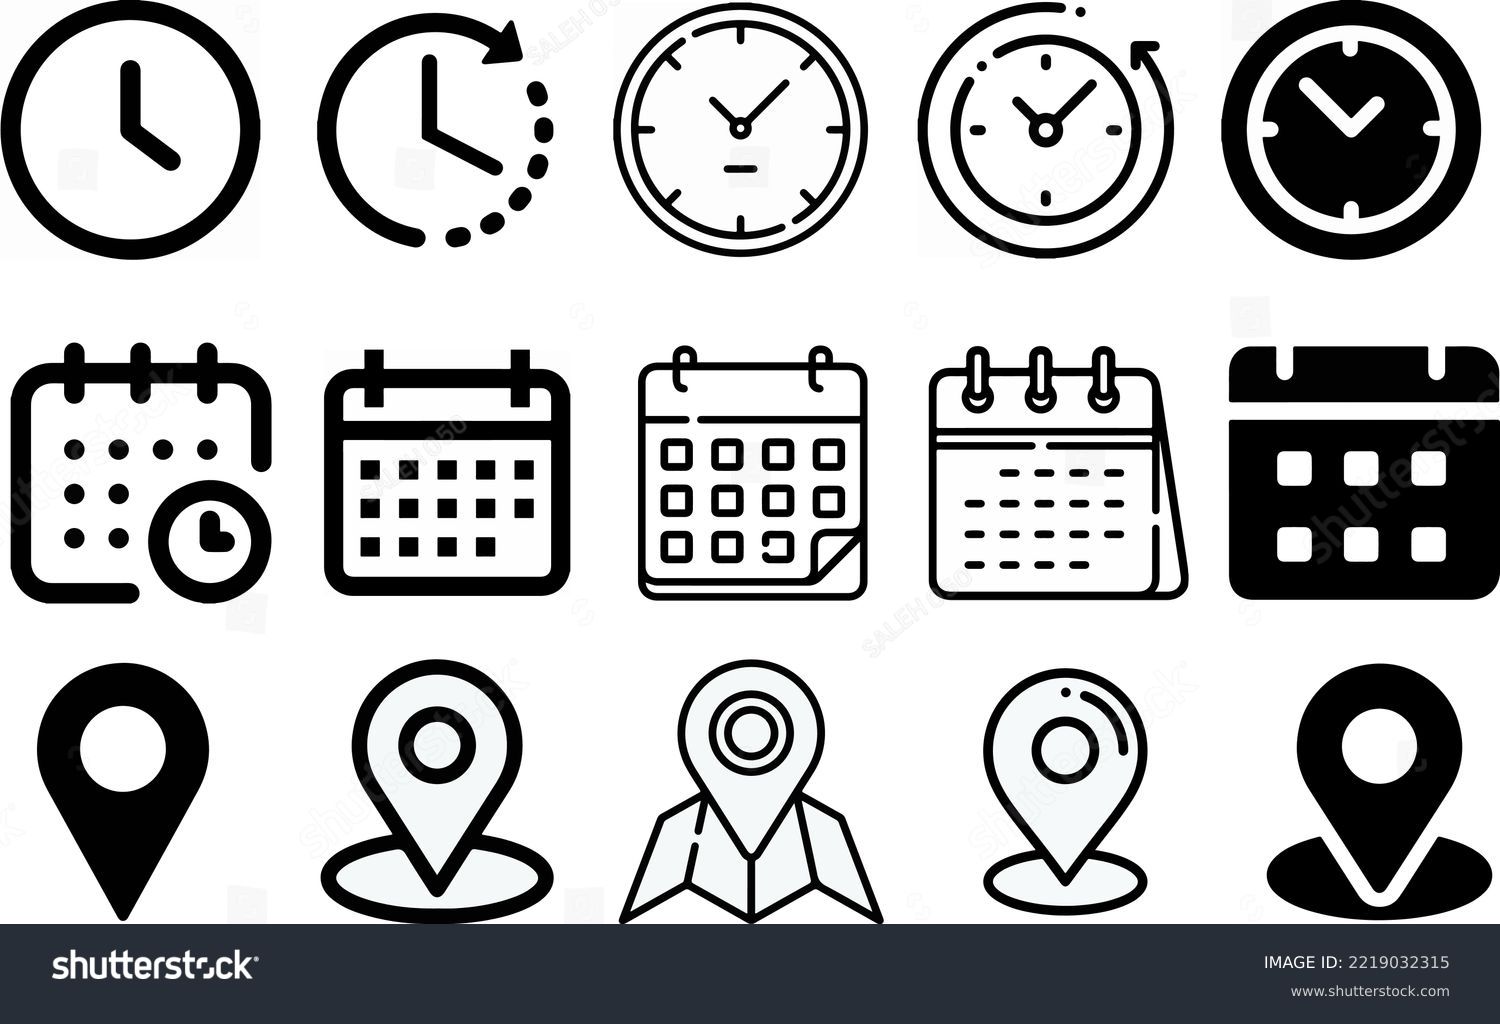 Time, date, and location icons in different shapes
 #2219032315